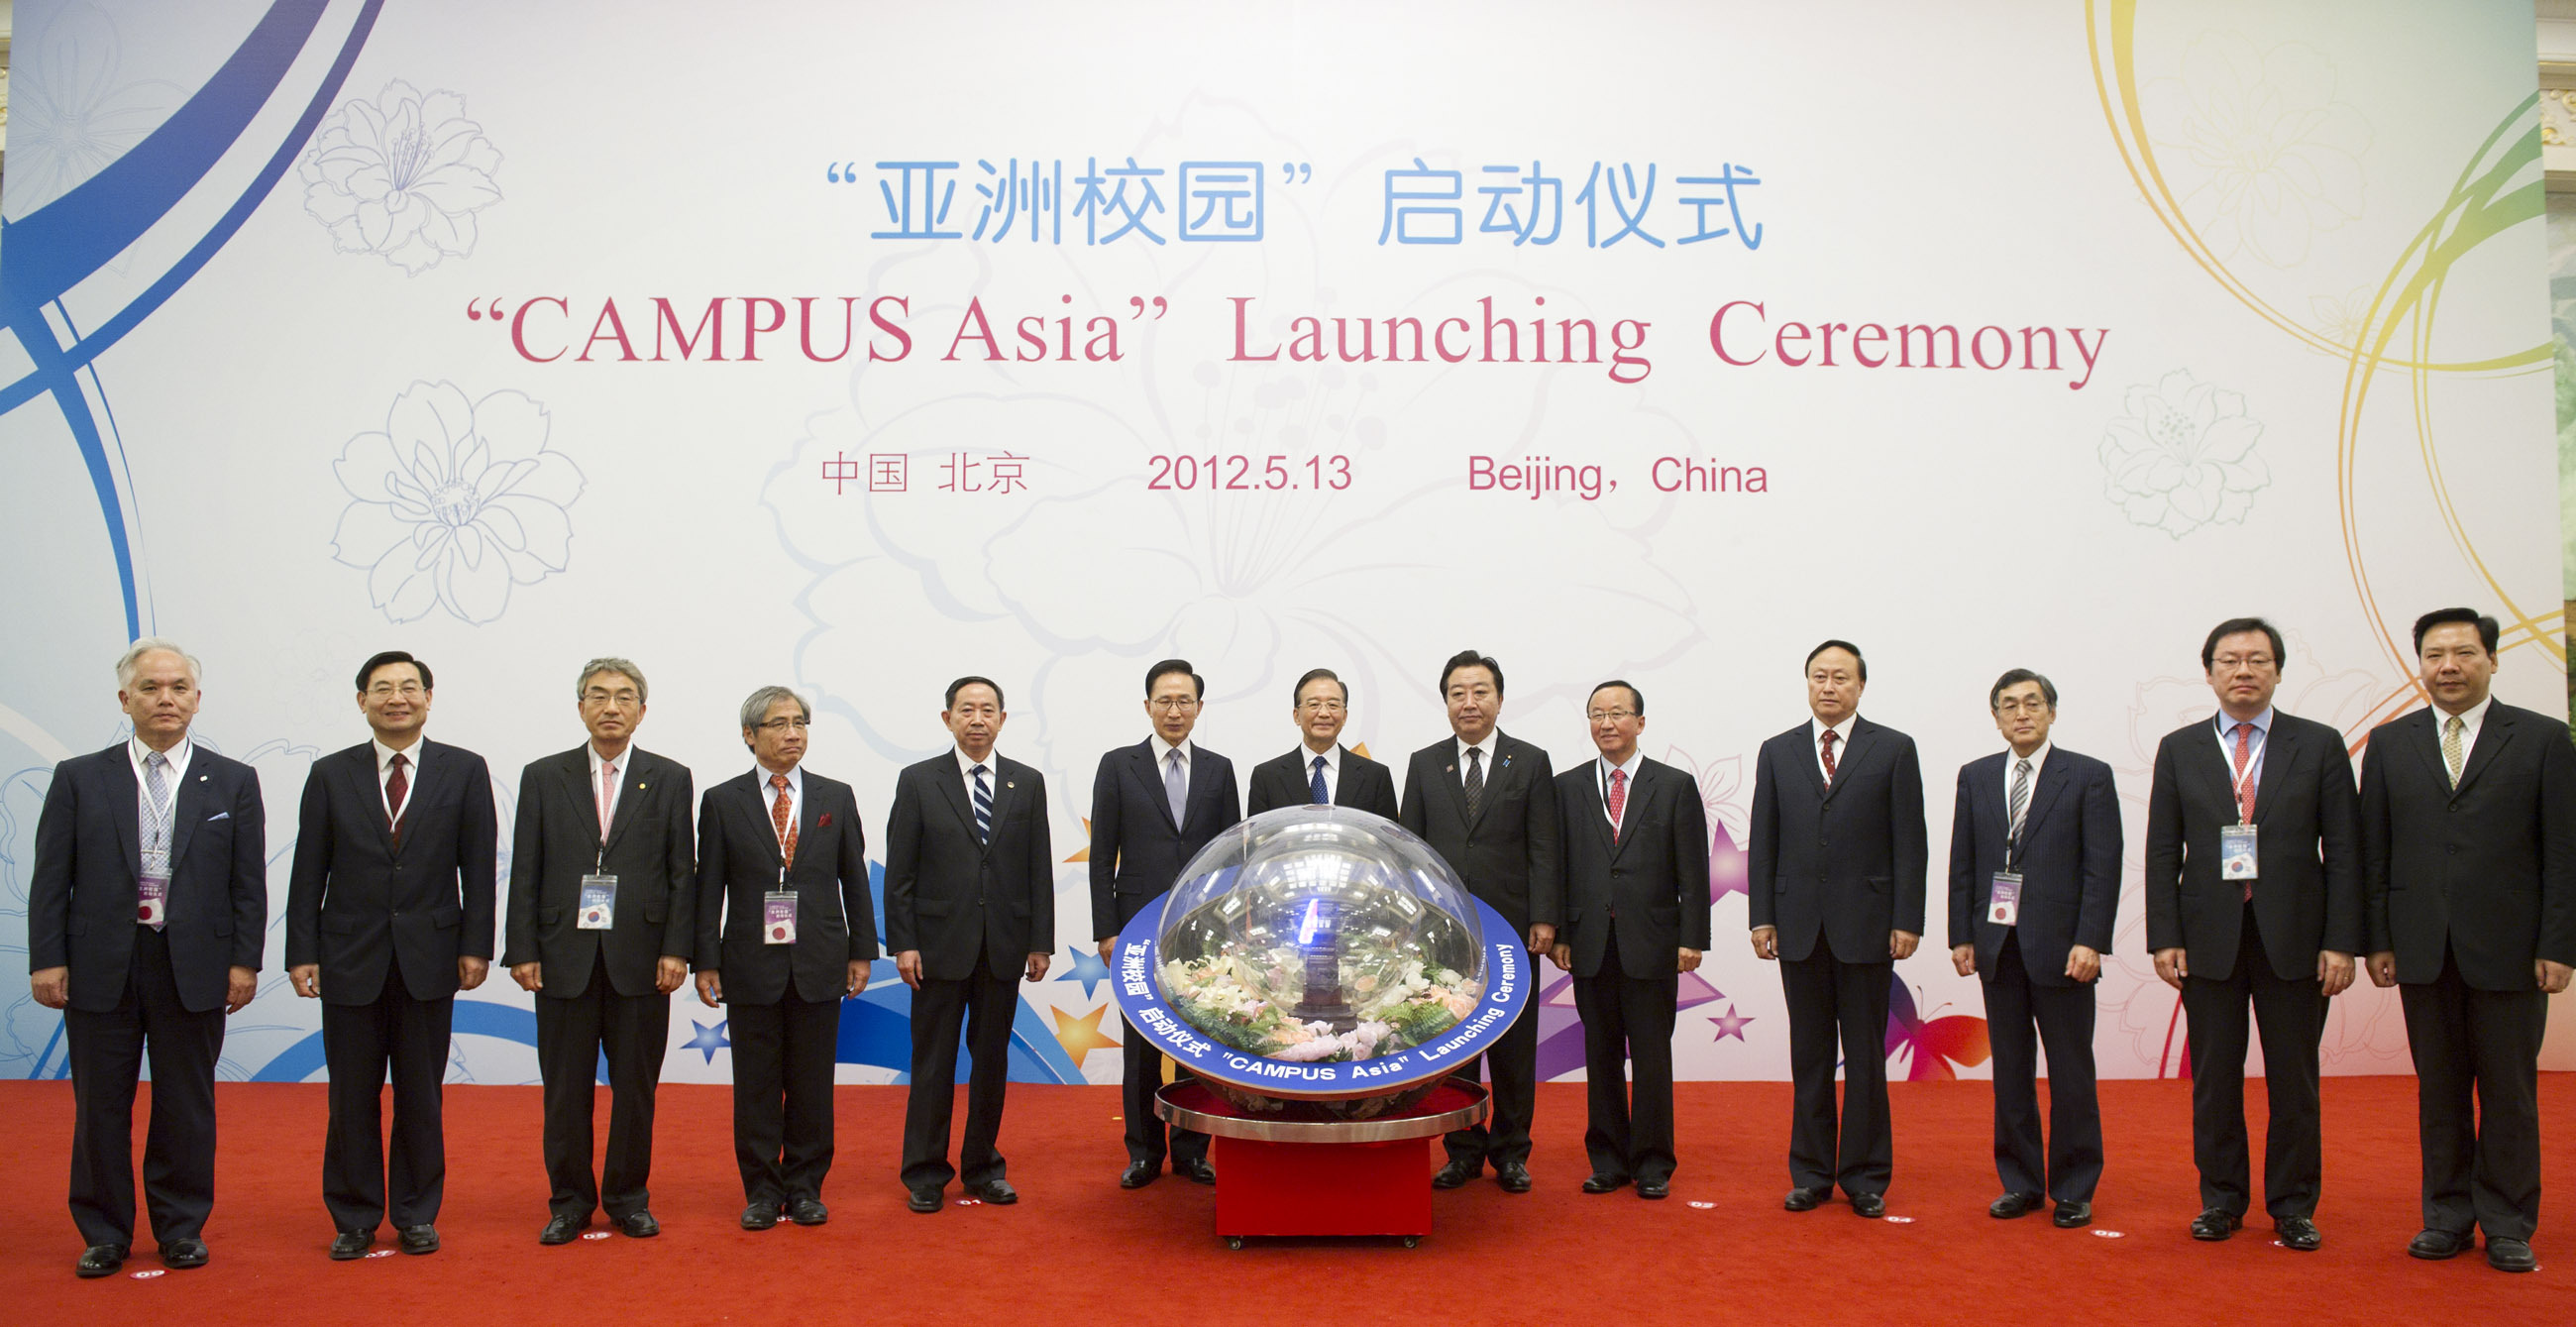 Campus Asia launched in China